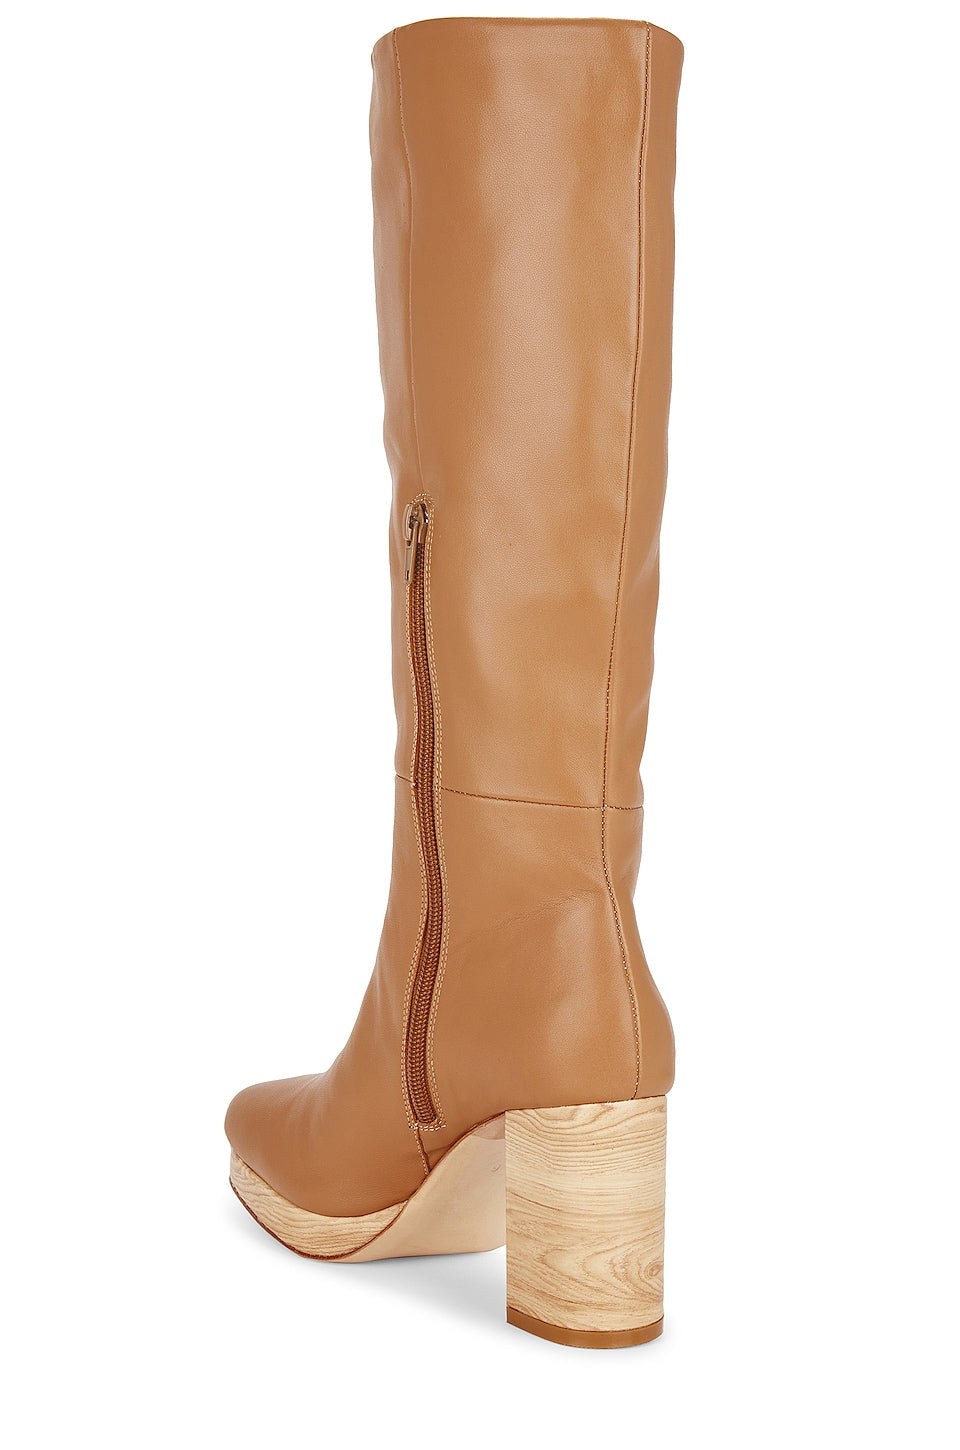 Song of Style Nineties Boot in Tan SIZE 10